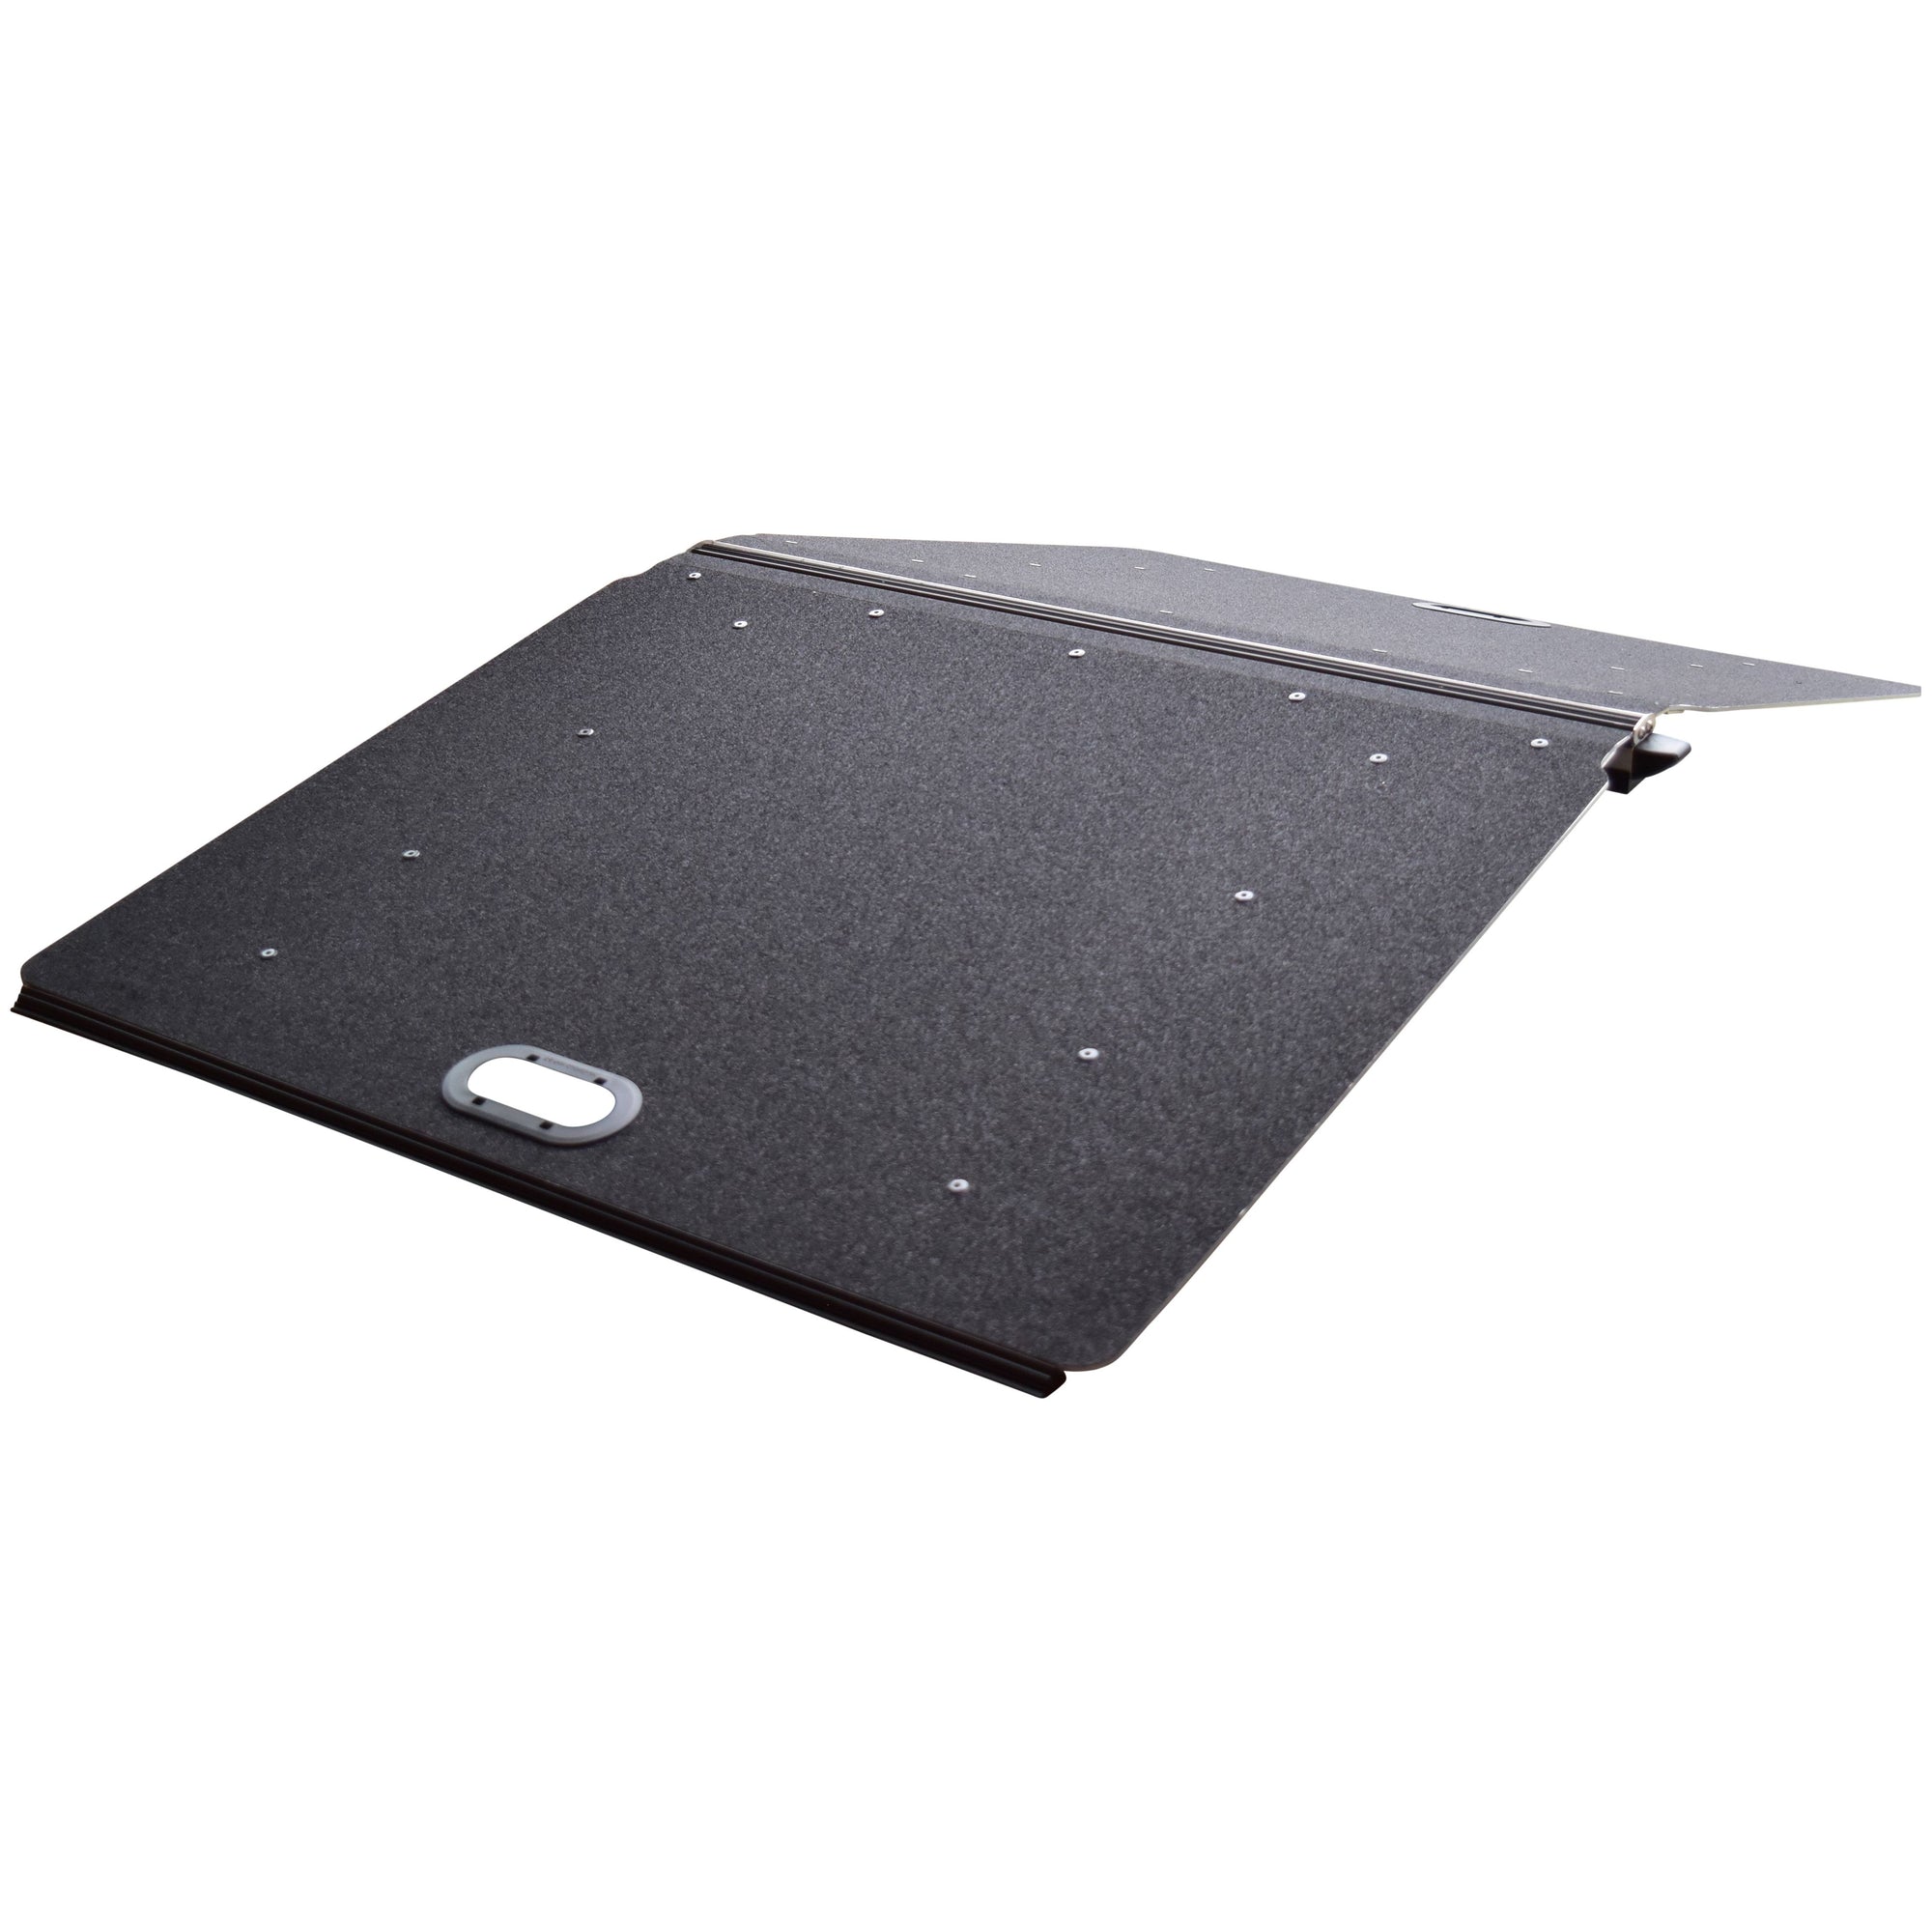 The Butterfly Compact Folding Threshold Ramp